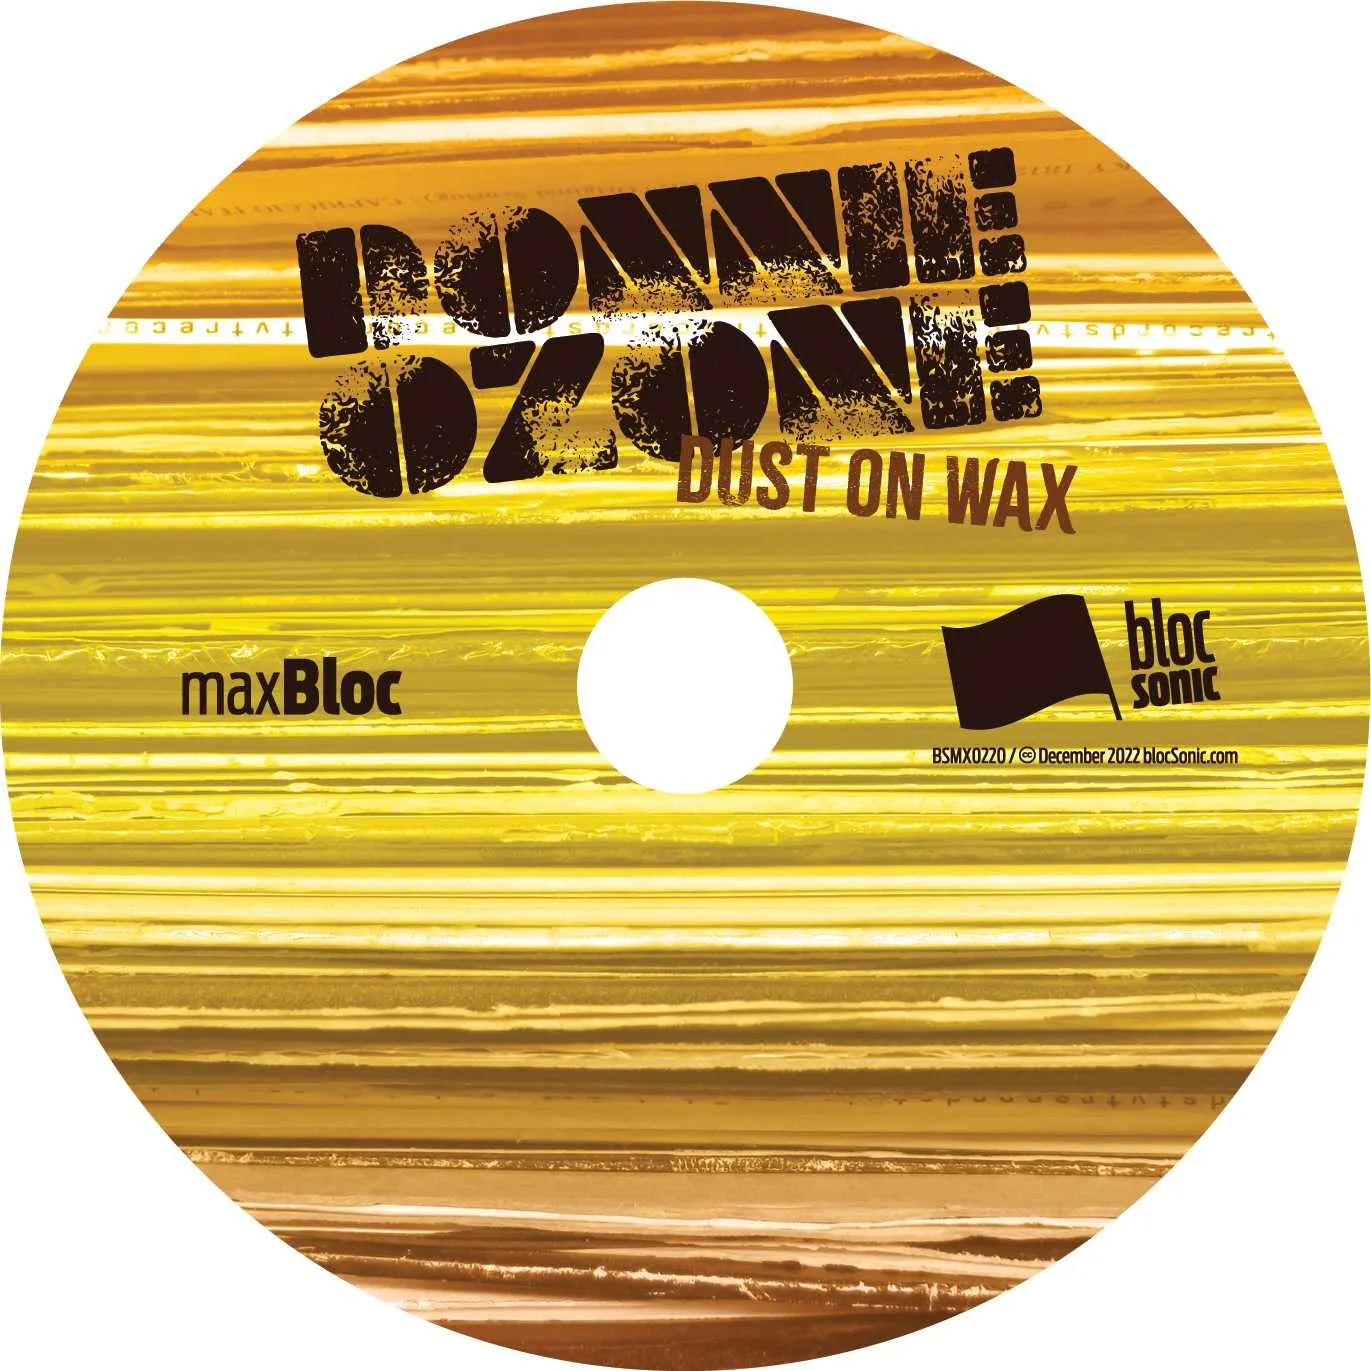 Album disc for “Dust On Wax” by Donnie Ozone